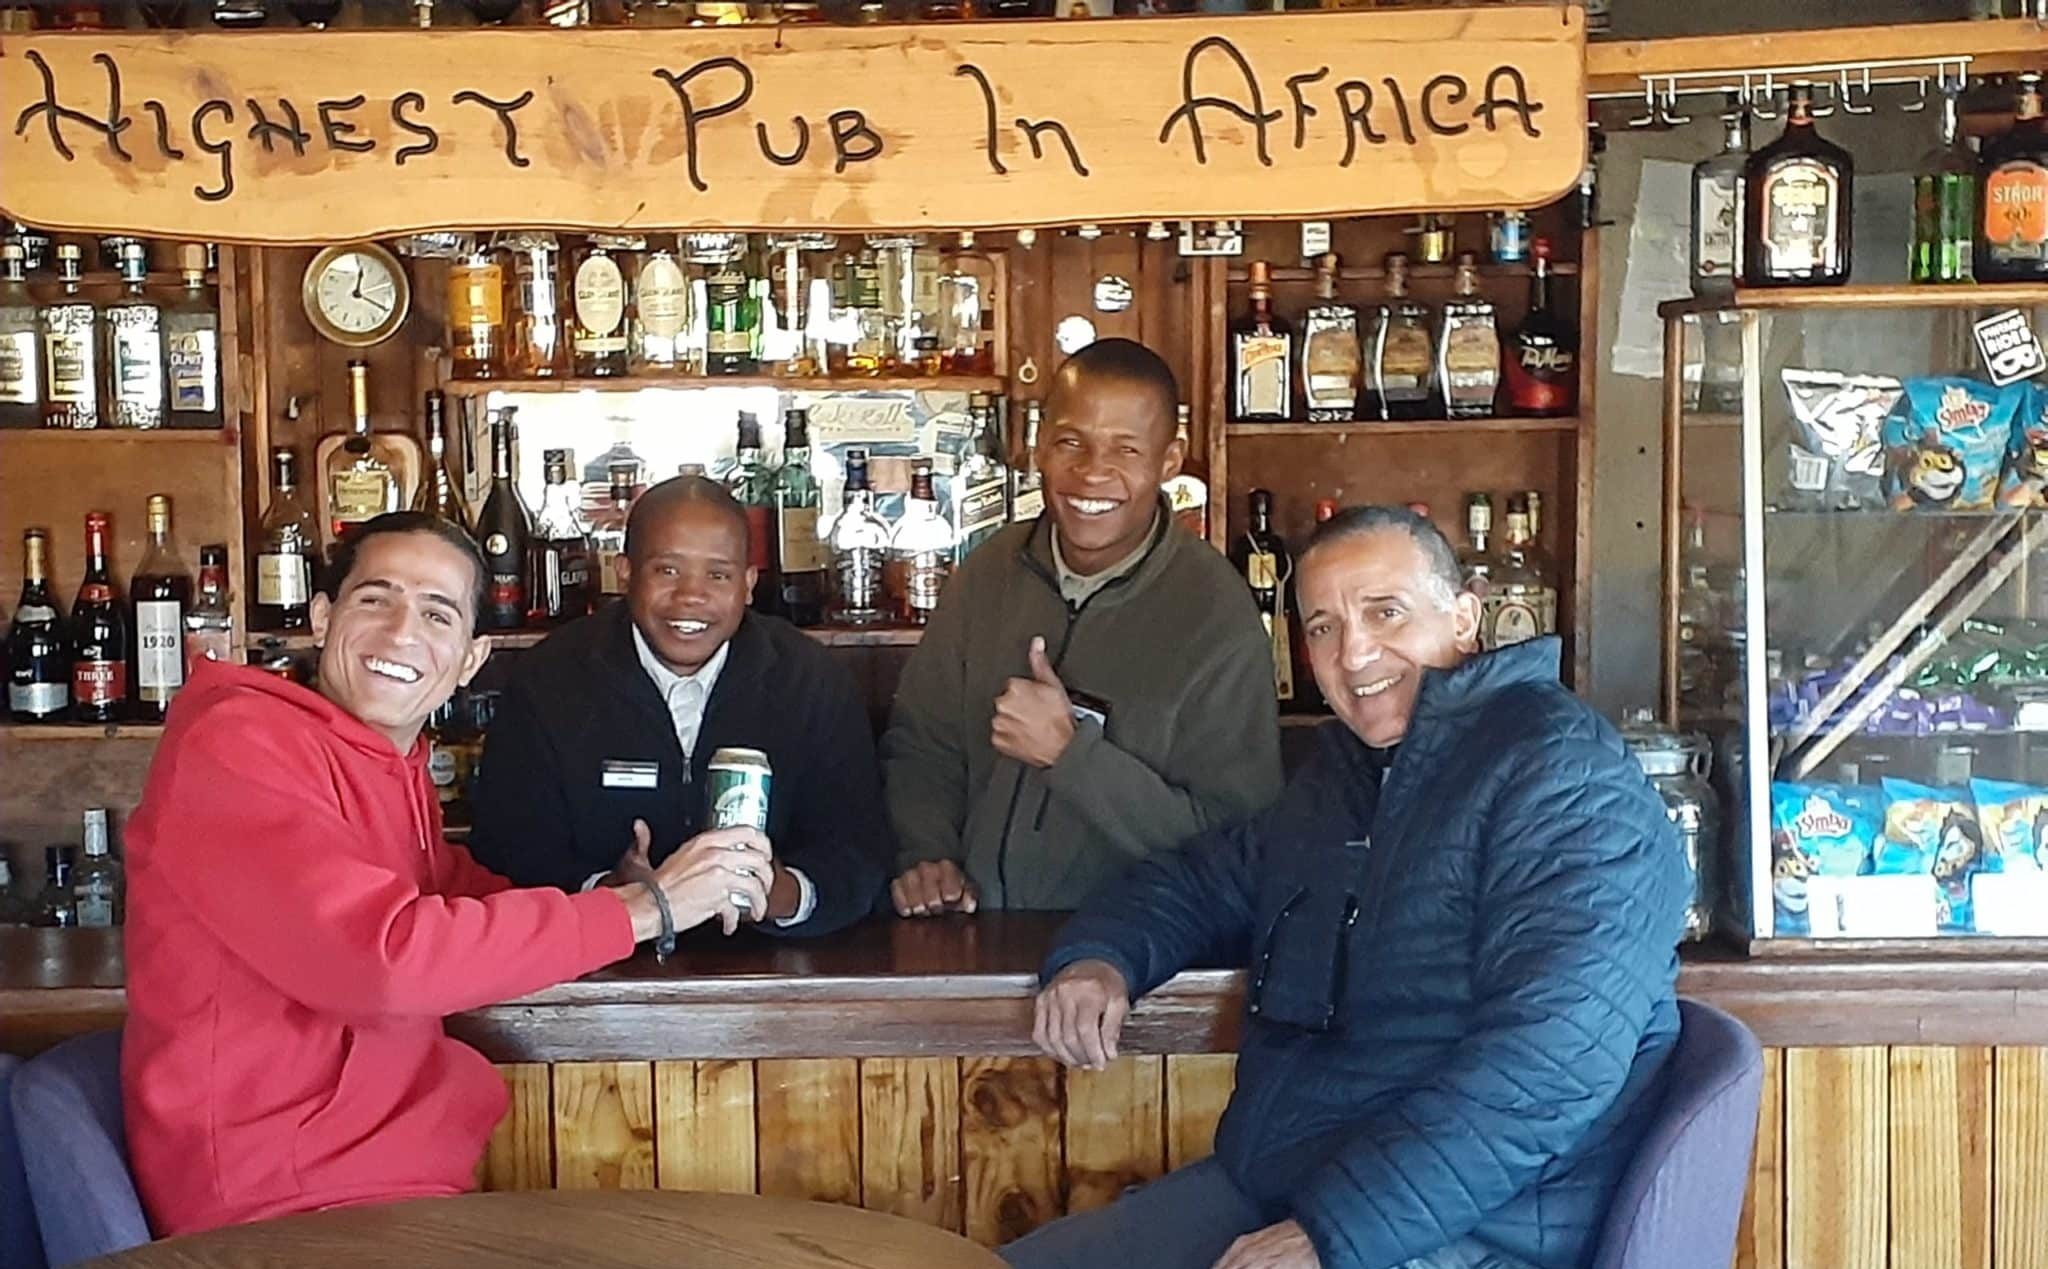 Guests at the Highest Pub